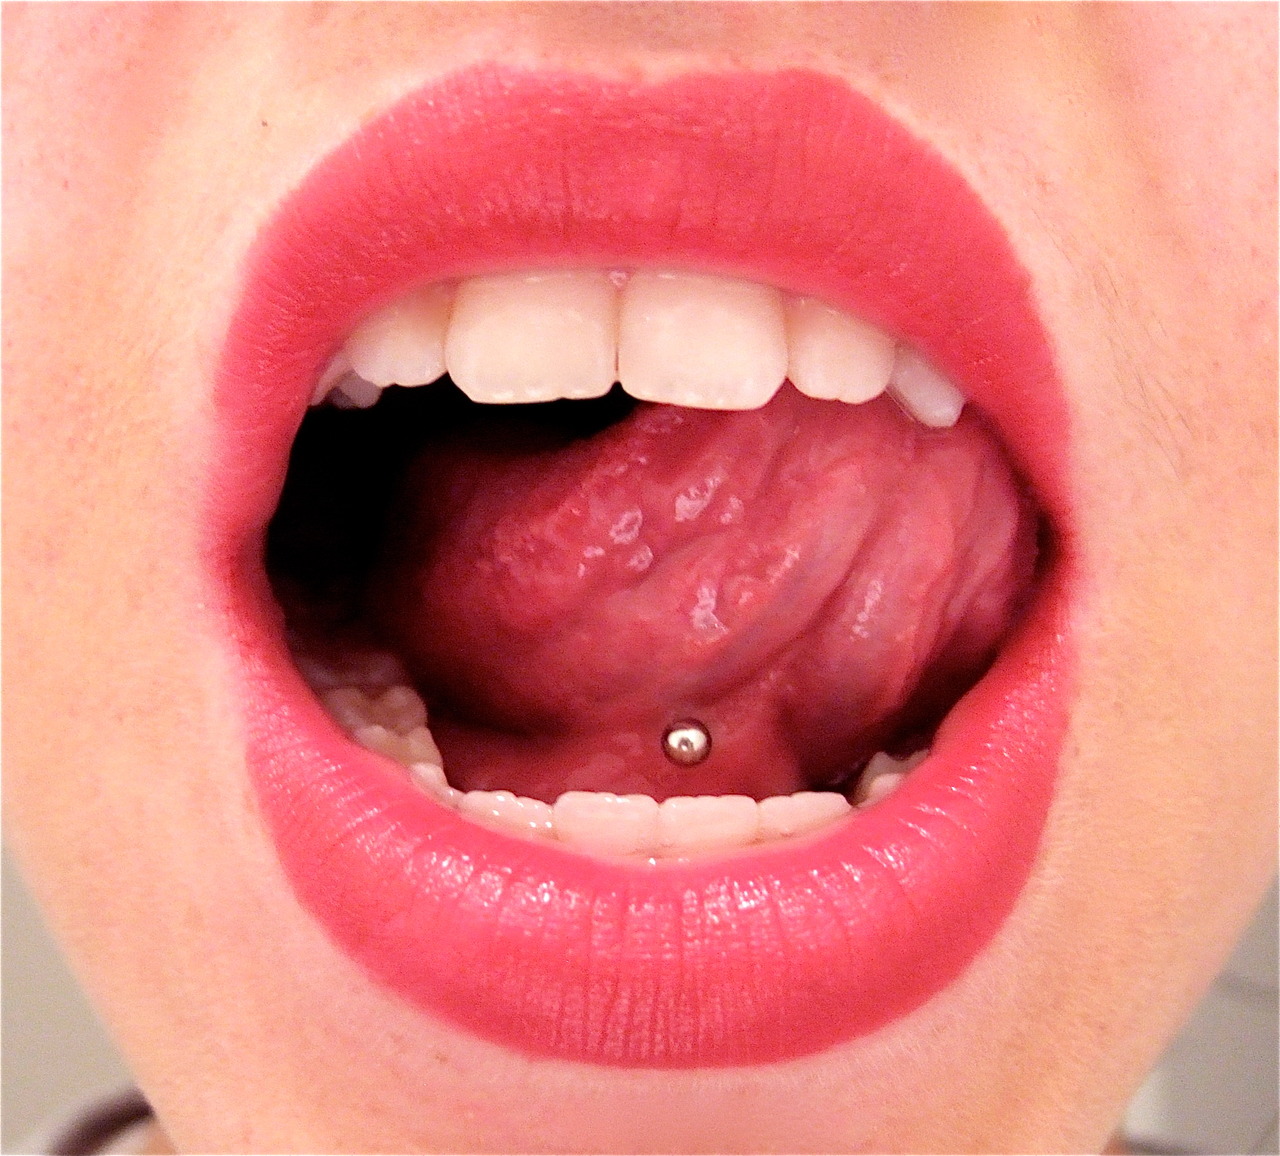 Girl Showing Webbing Piercing With Silver Barbell